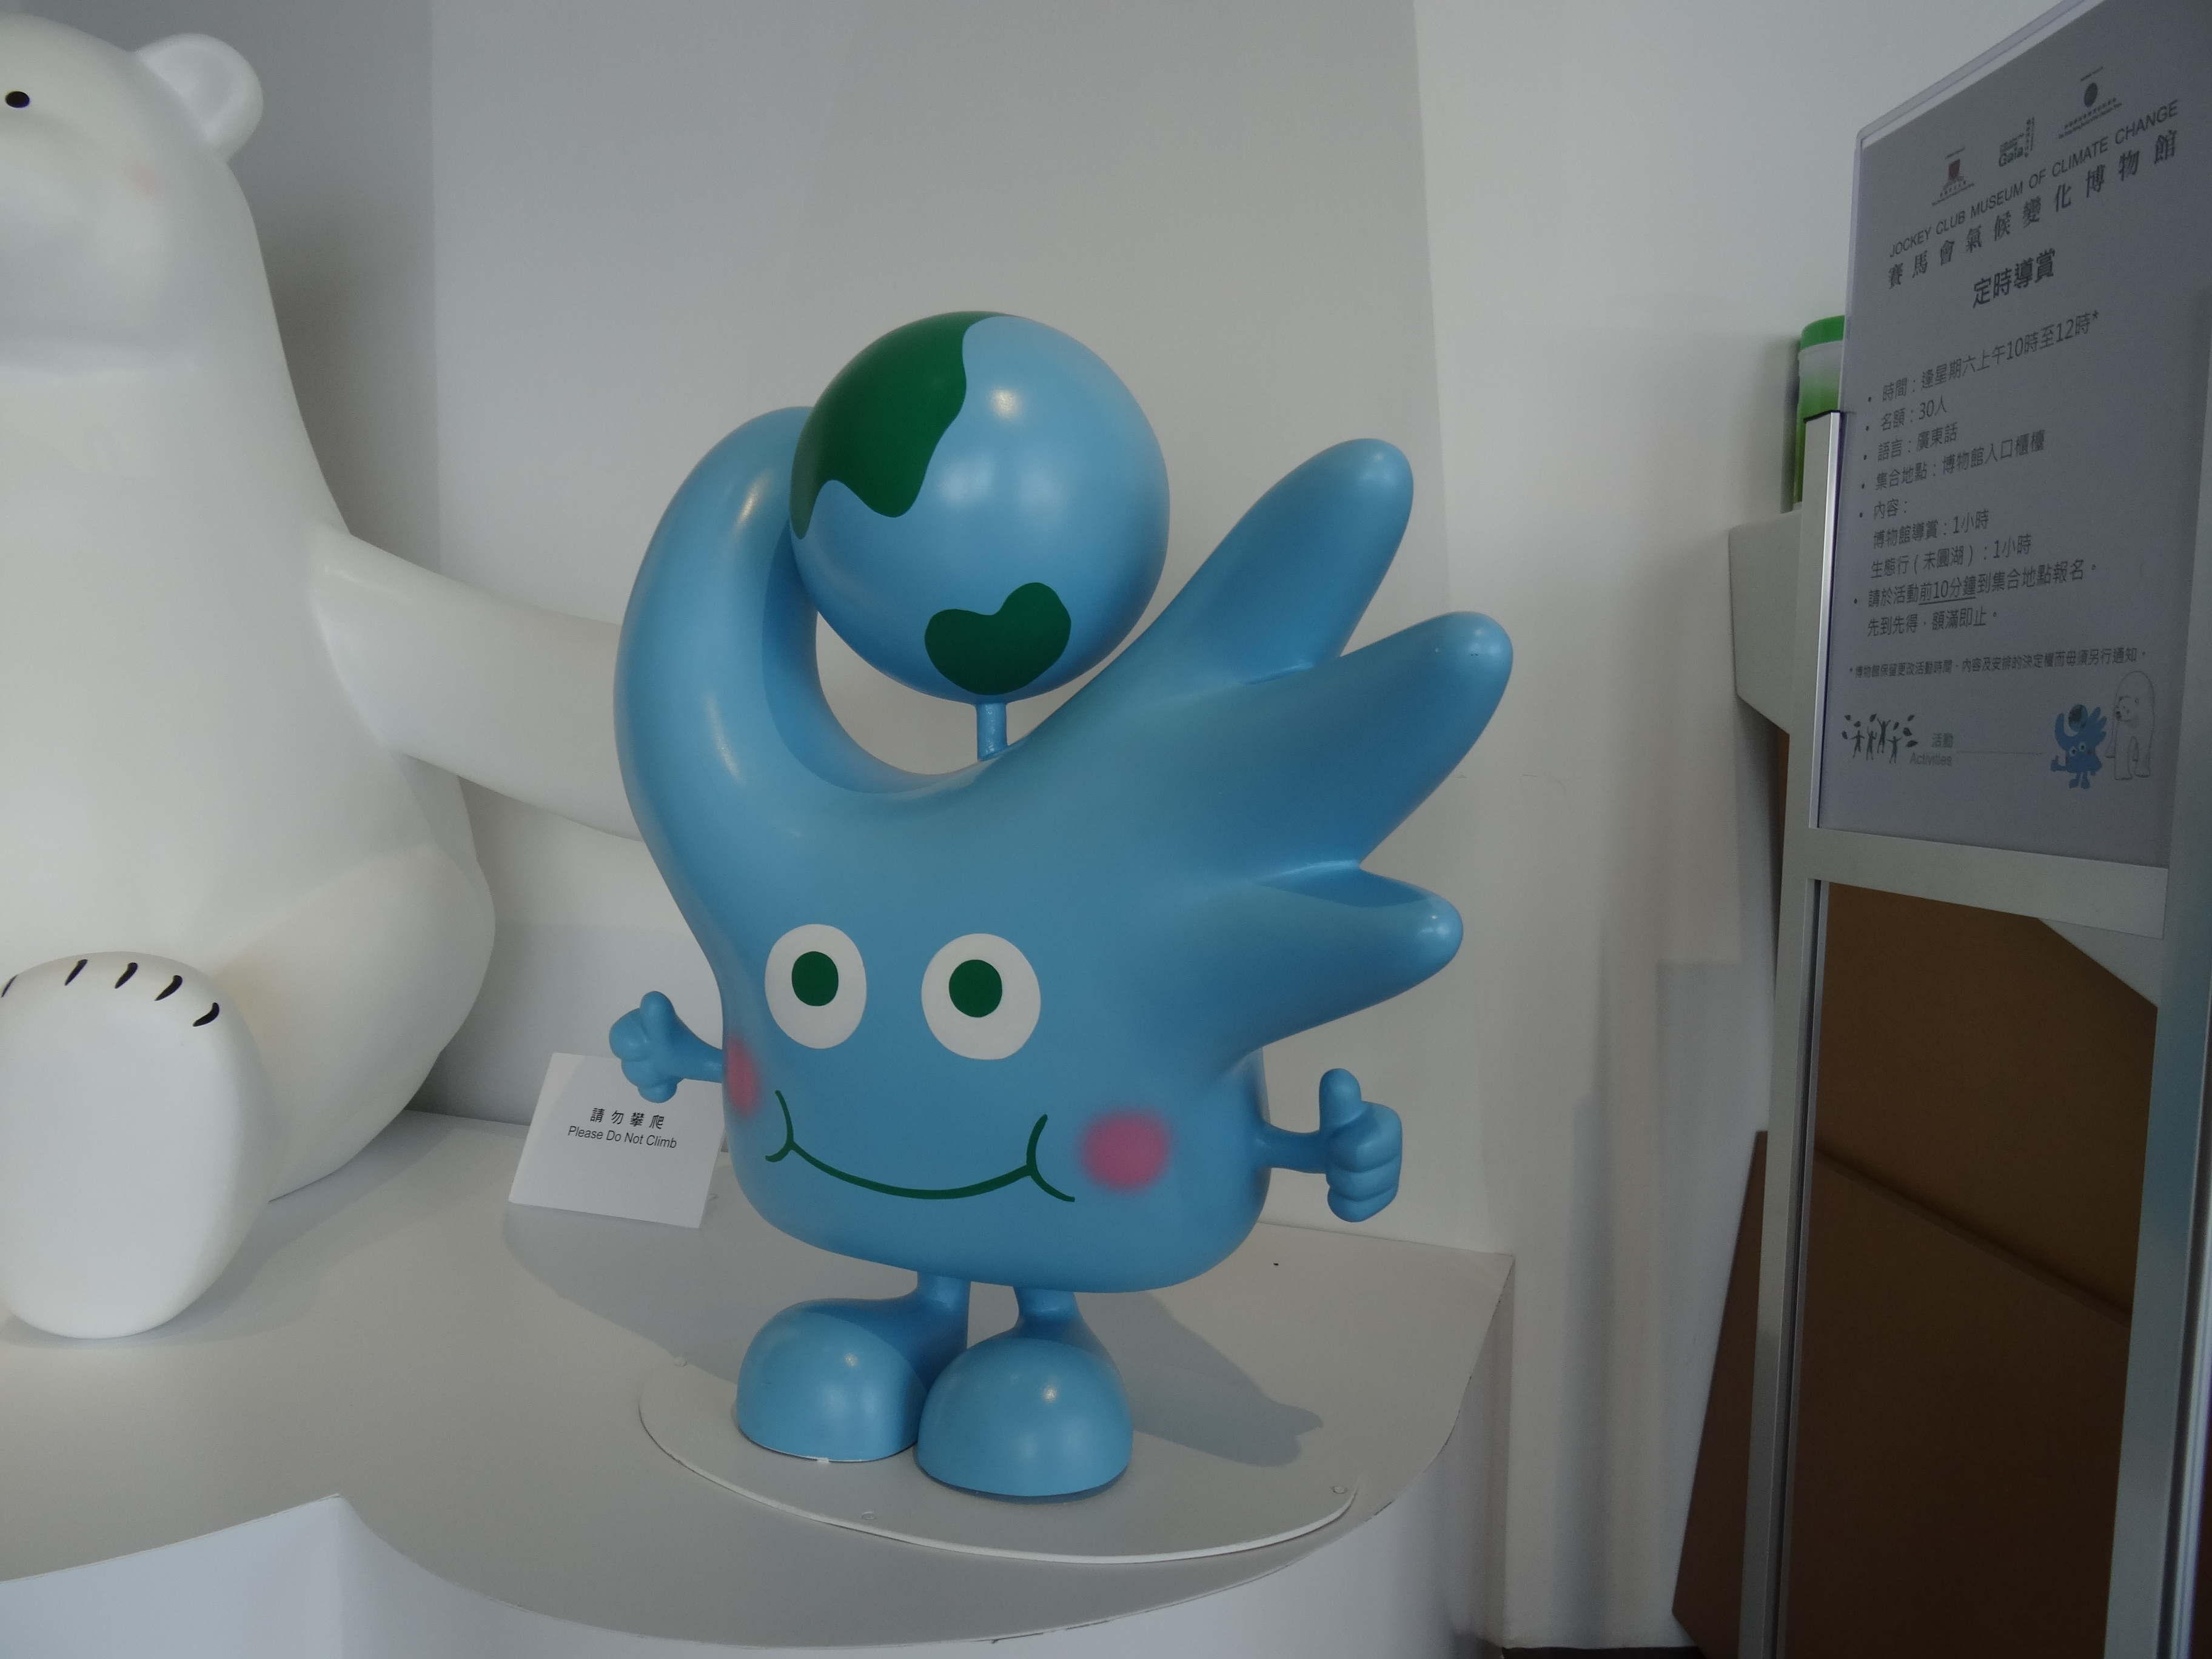 Meet 'Gaia', the Museum's mascot. Symbolising 'the world in our hands', Gaia, in Greek mythology, is the personification of the earth.